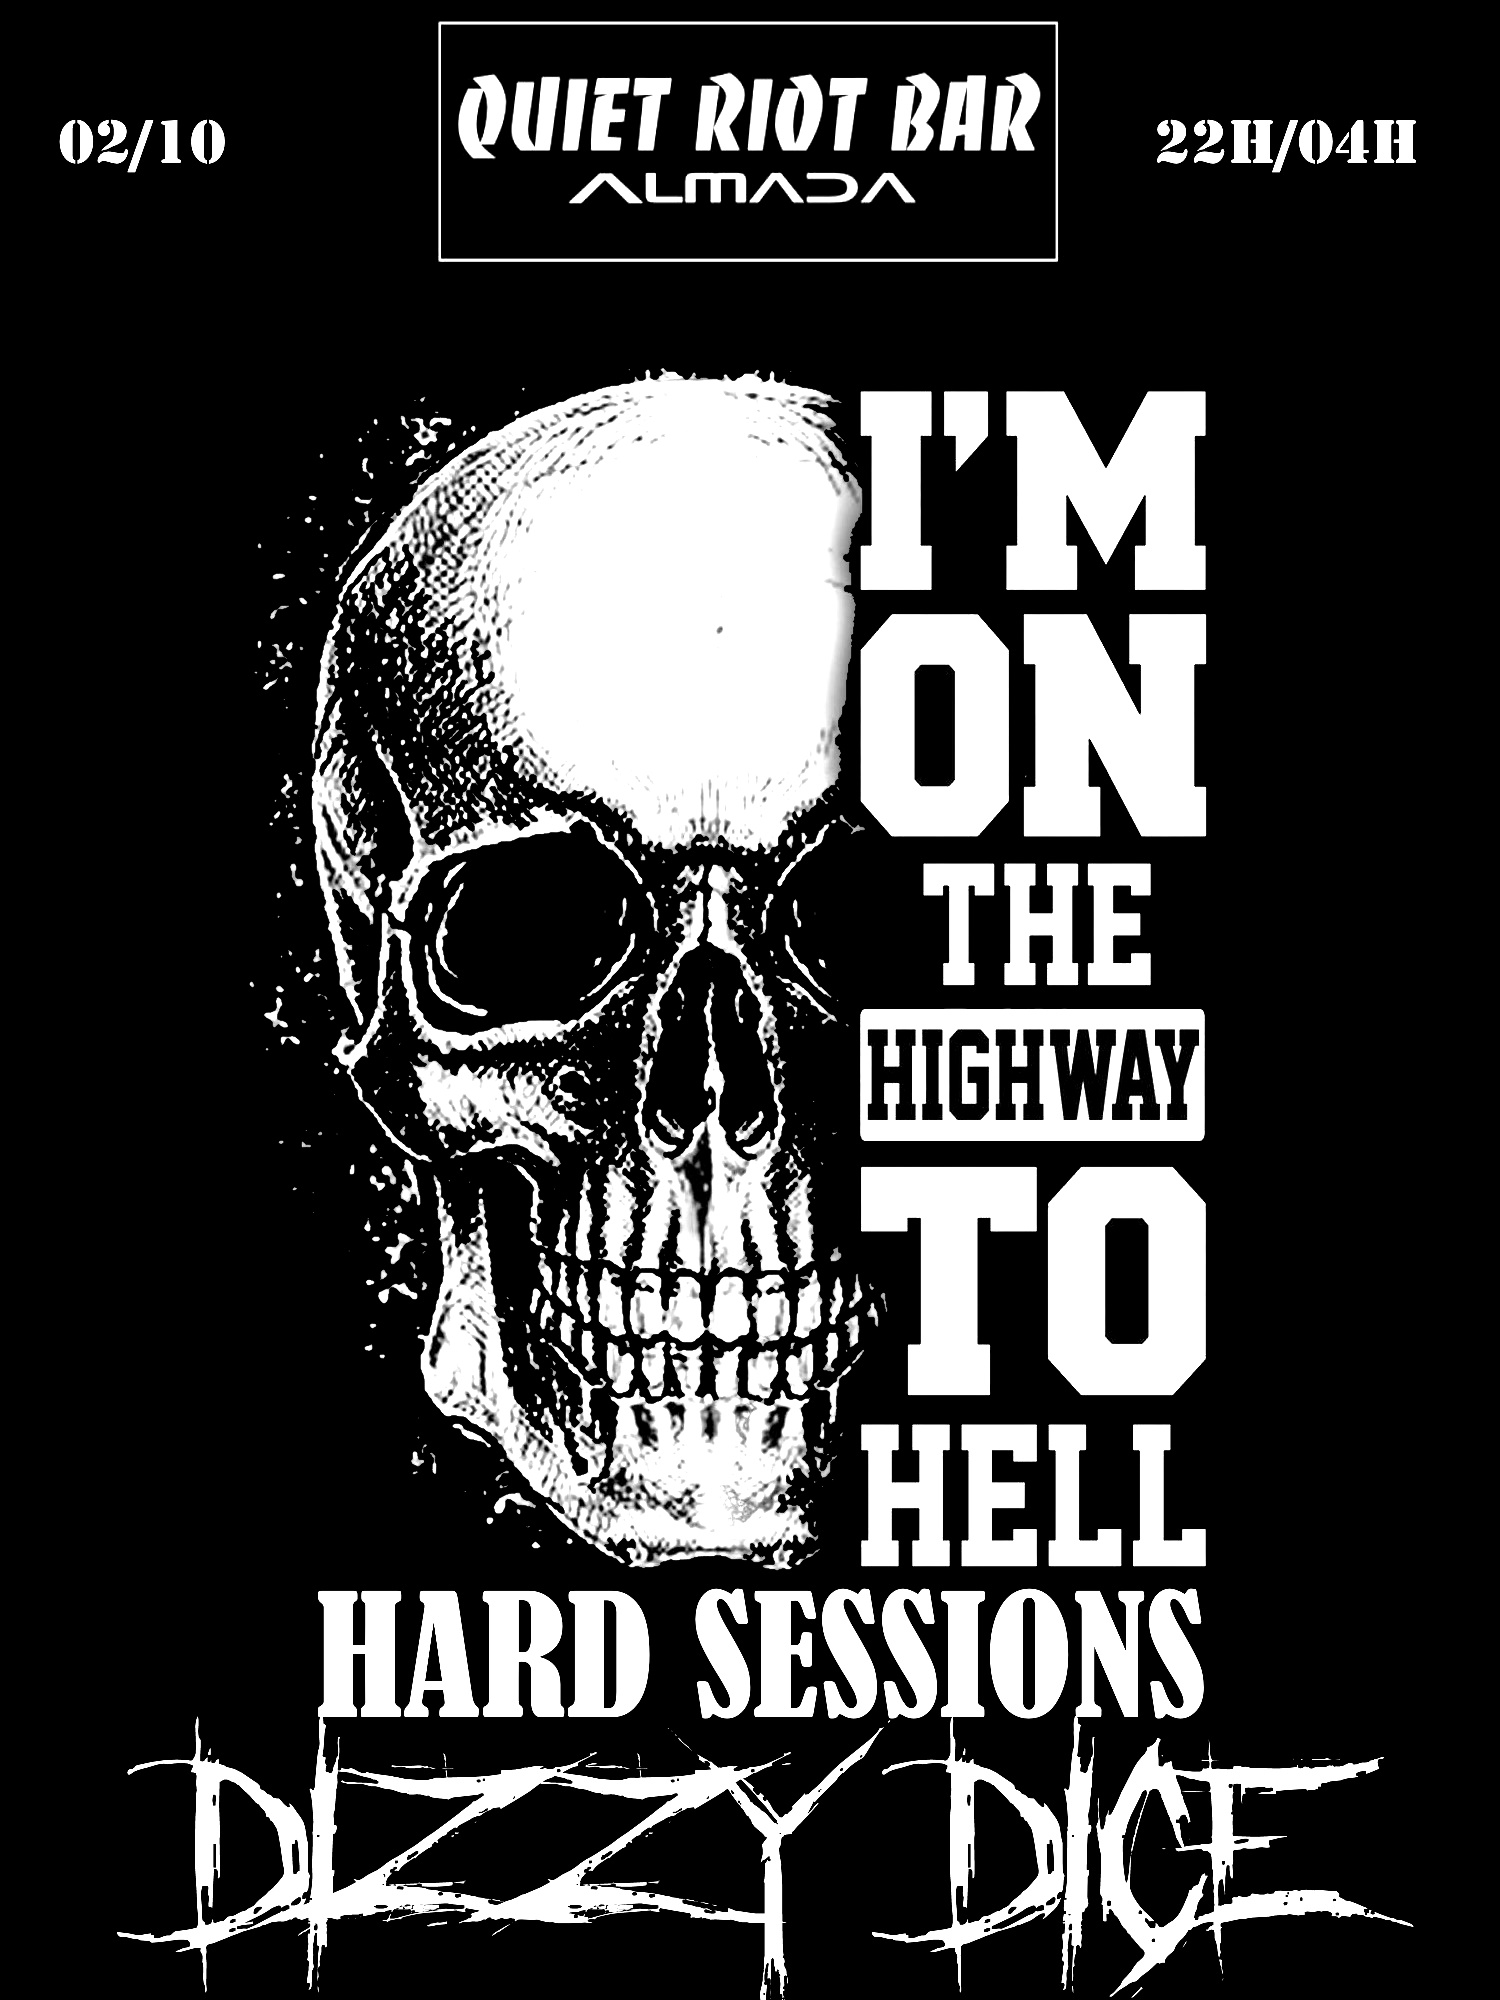 Hard Sessions by Dizzy Dice @ Quiet Riot Bar